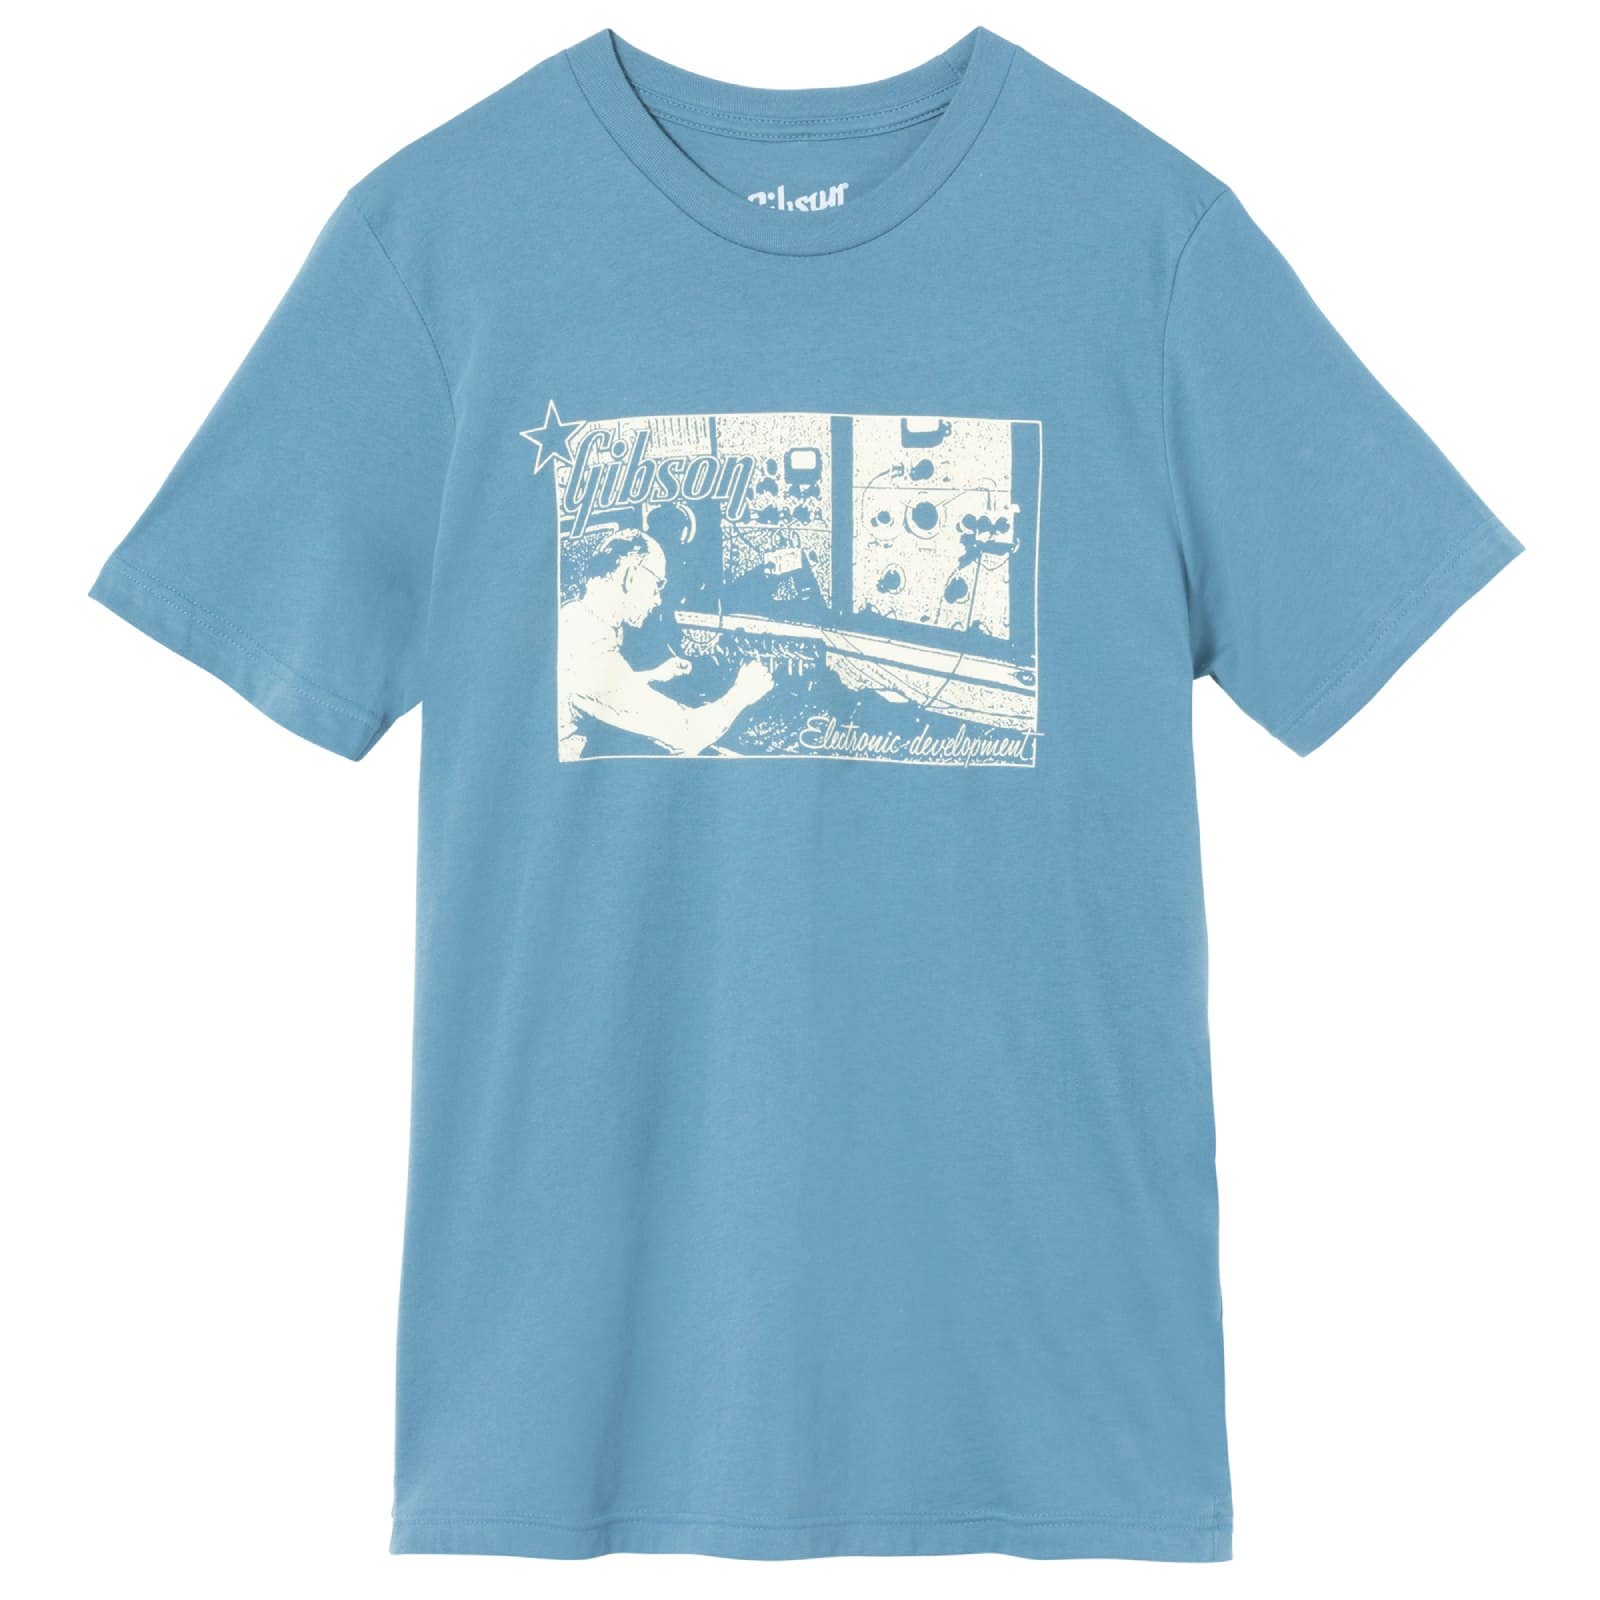 GIBSON ACCESSORIES ELECTRONIC DEVELOPMENT TEE VINTAGE BLUE TAILLE M 